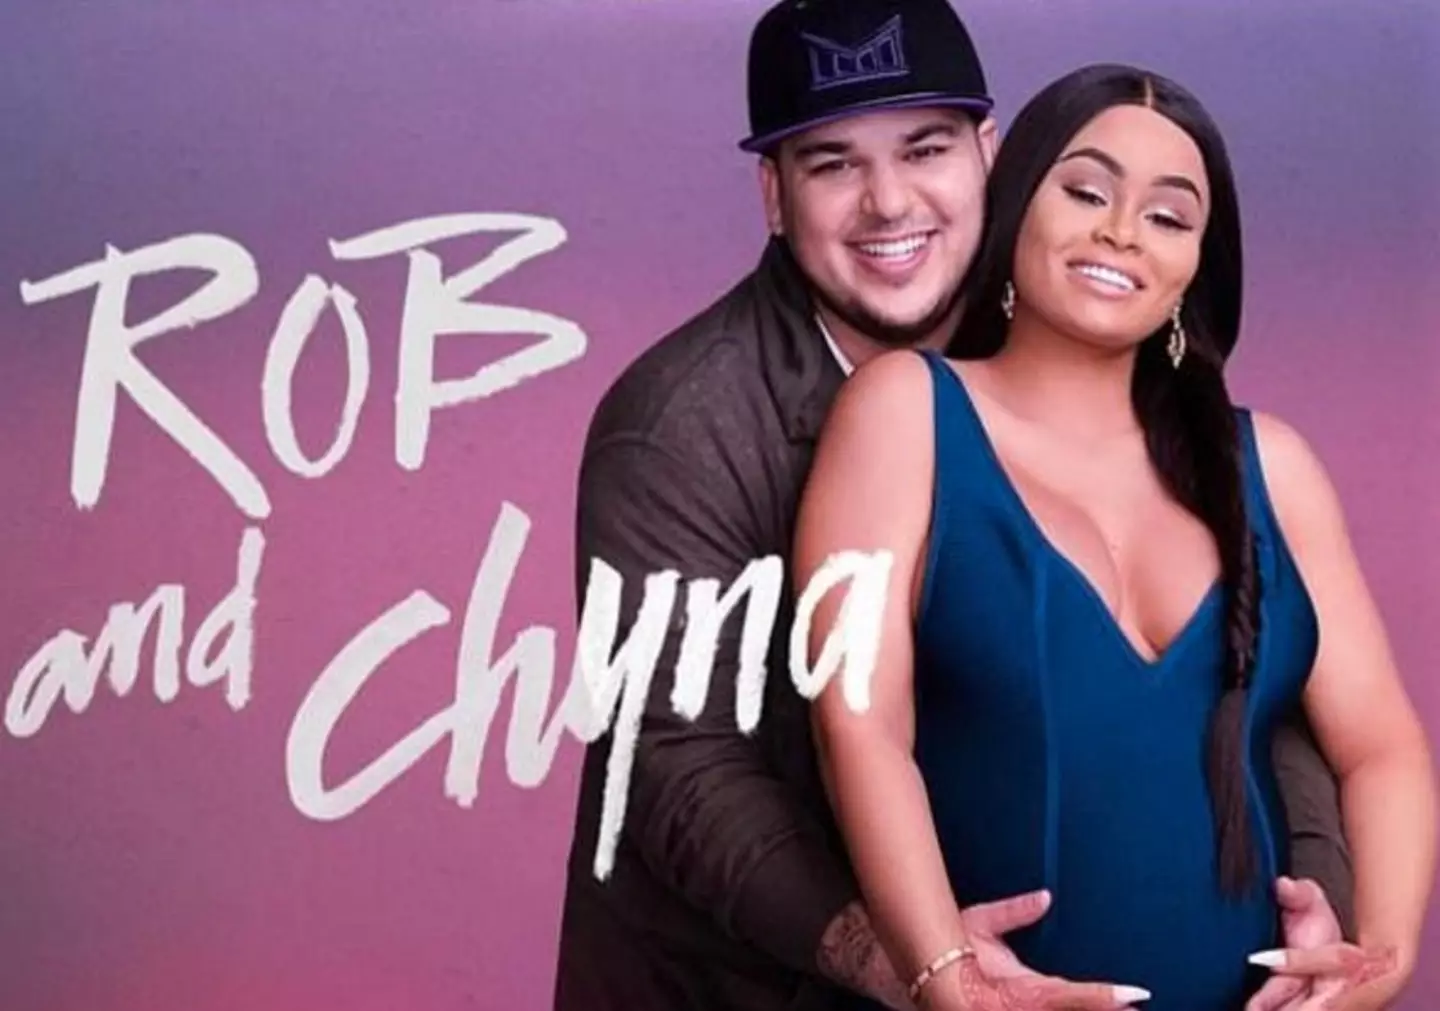 Blac Chyna claimed the Kardashians interfered with her carer, including her reality show.